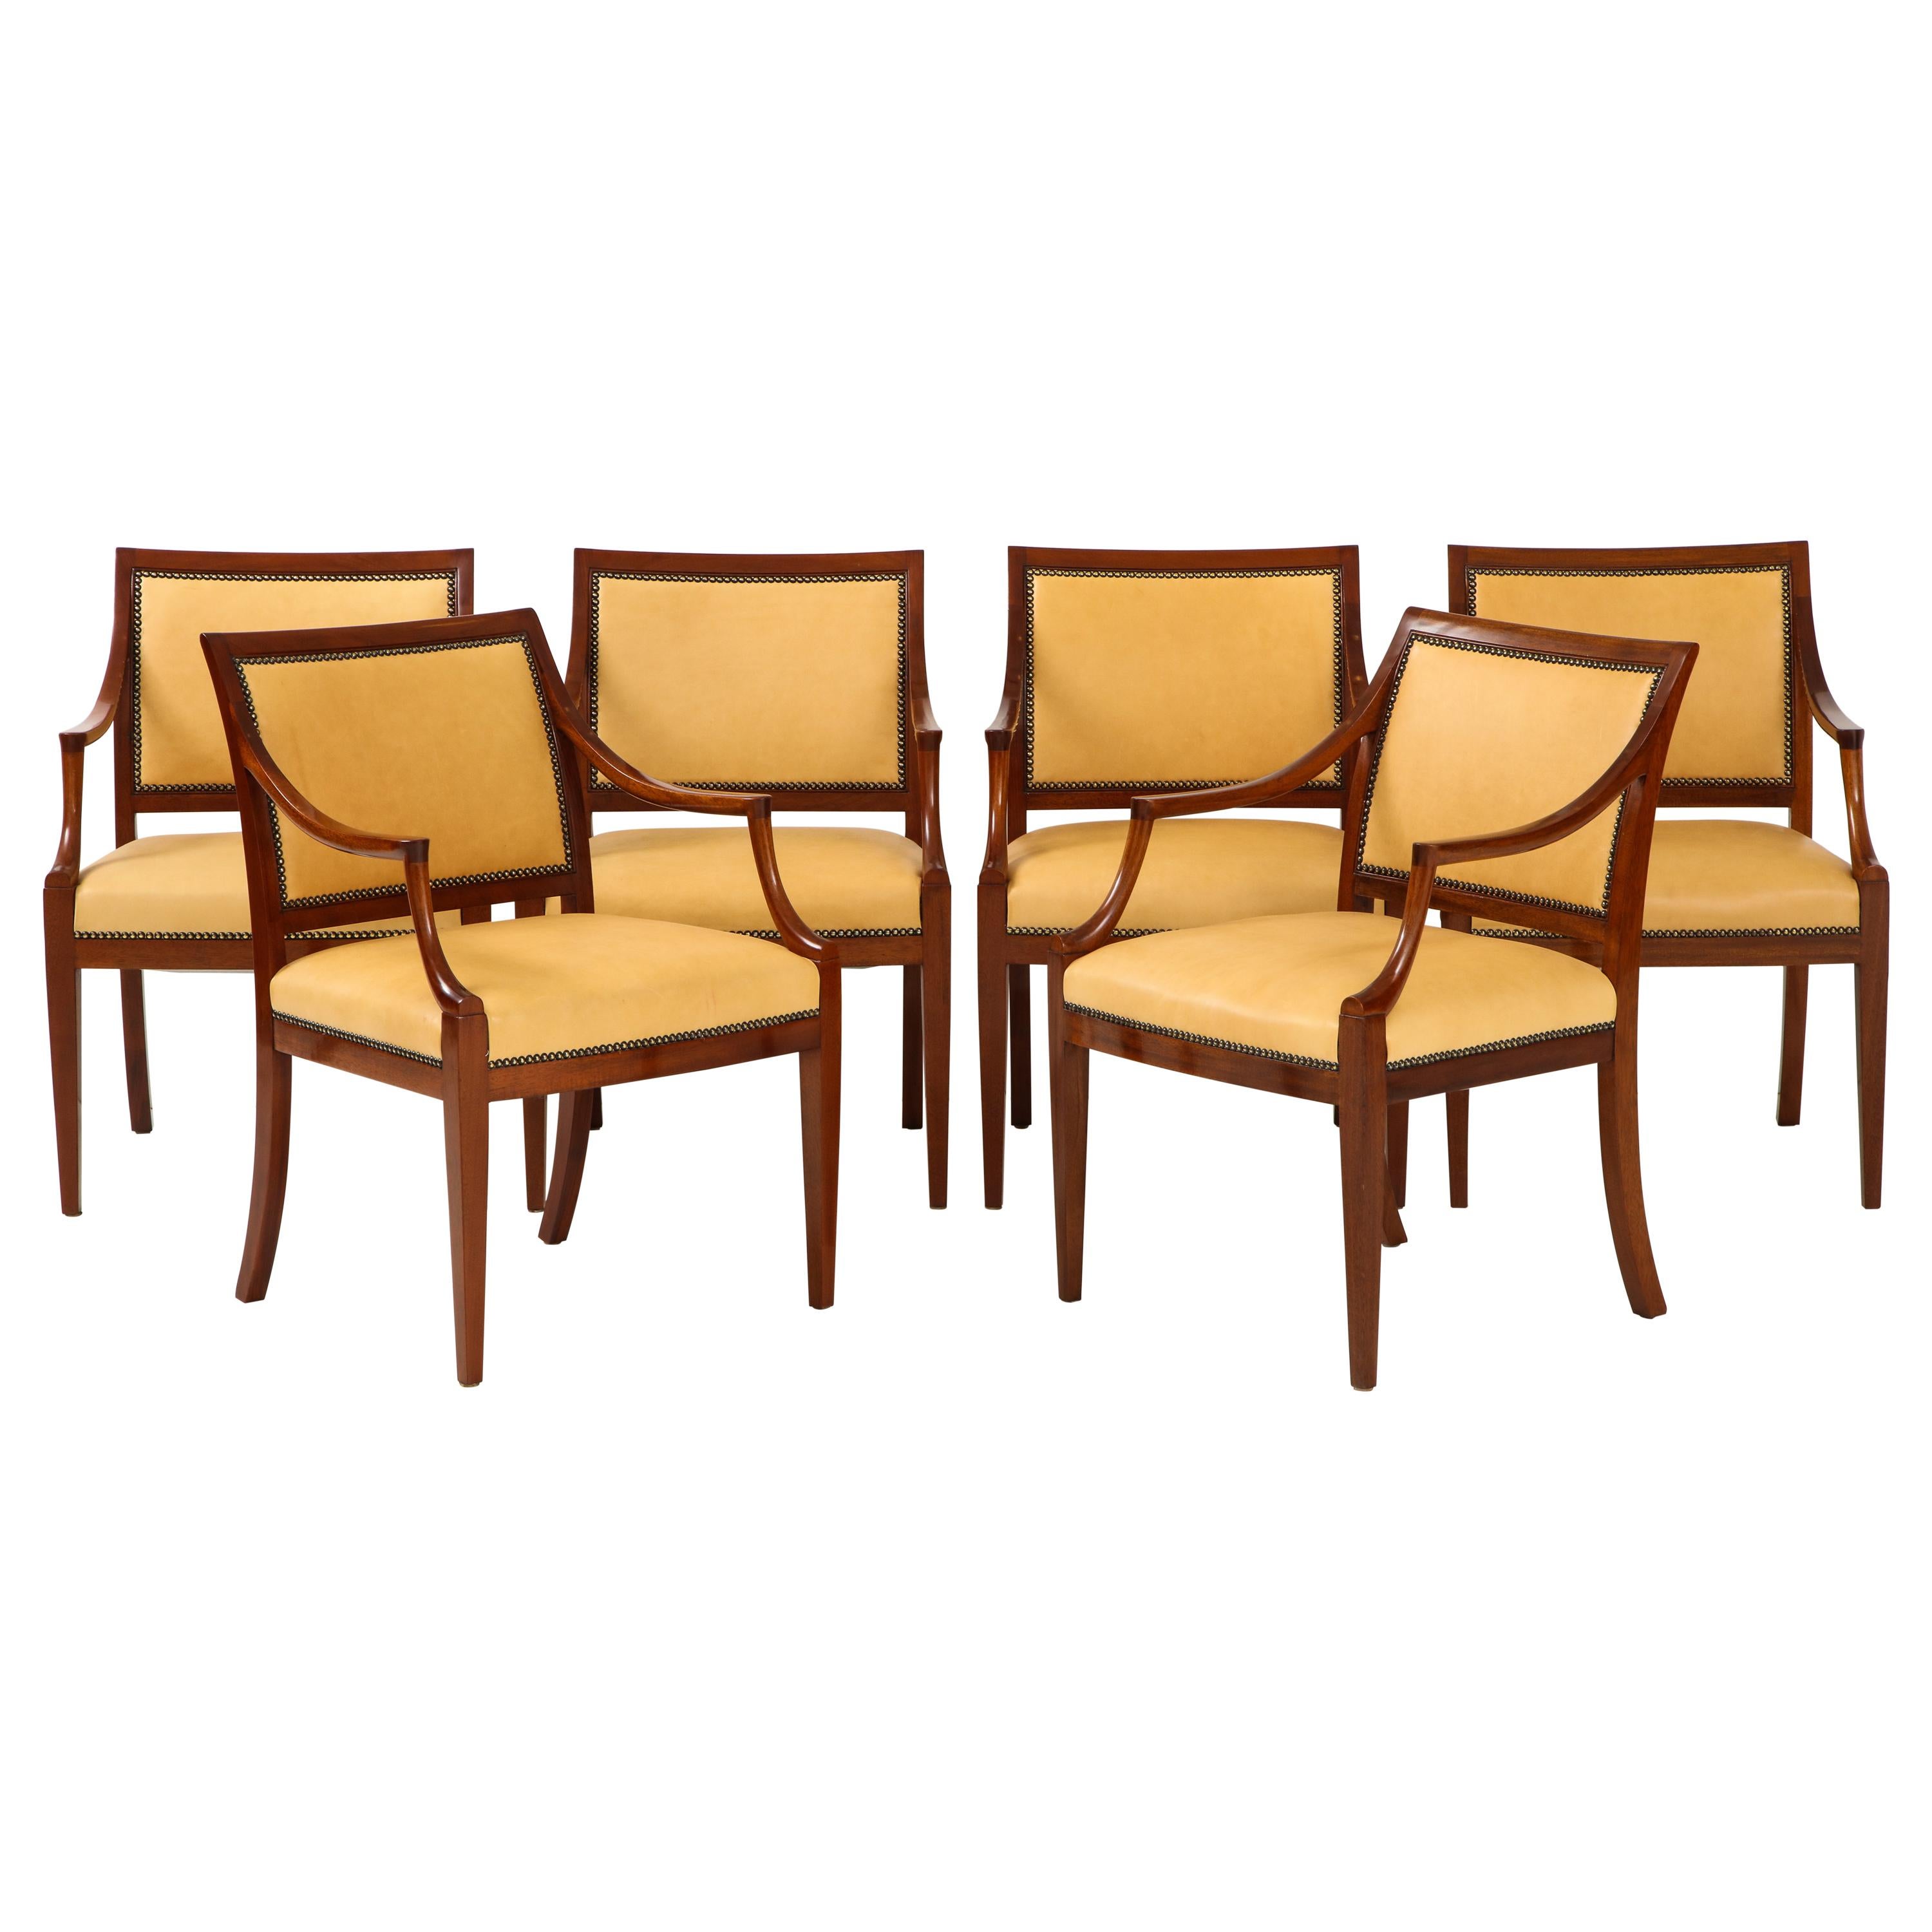 Set of Four Danish Mahogany Open Armchairs by Frits Henningsen, circa 1940s